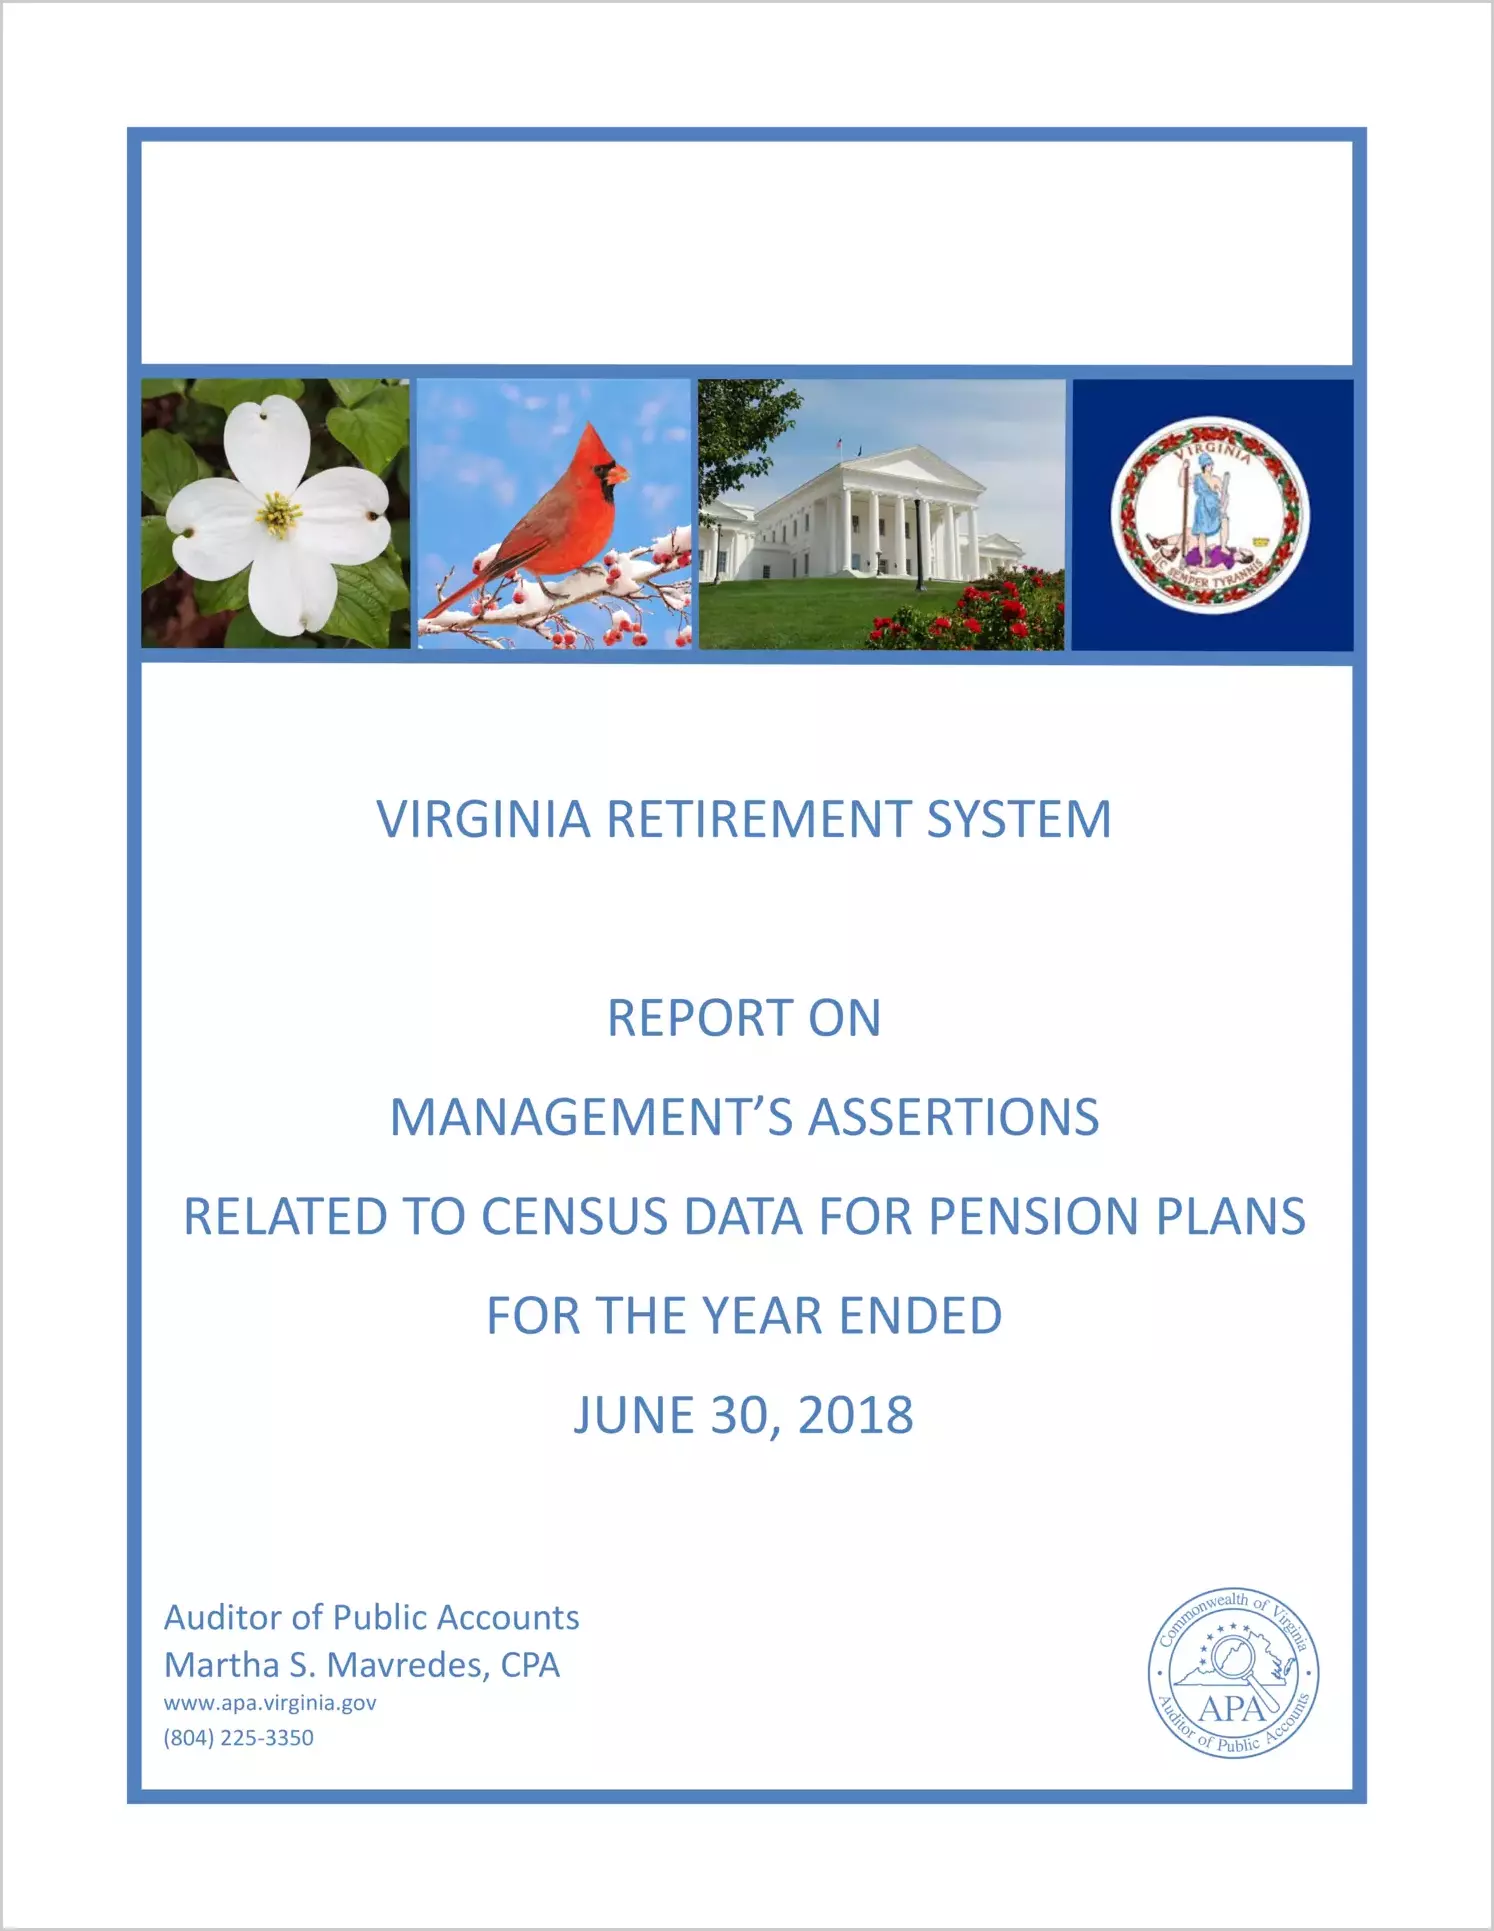 Virginia Retirement System Management's Assertions Related to Census Data for Pension Plans for the year ended June 30, 2018